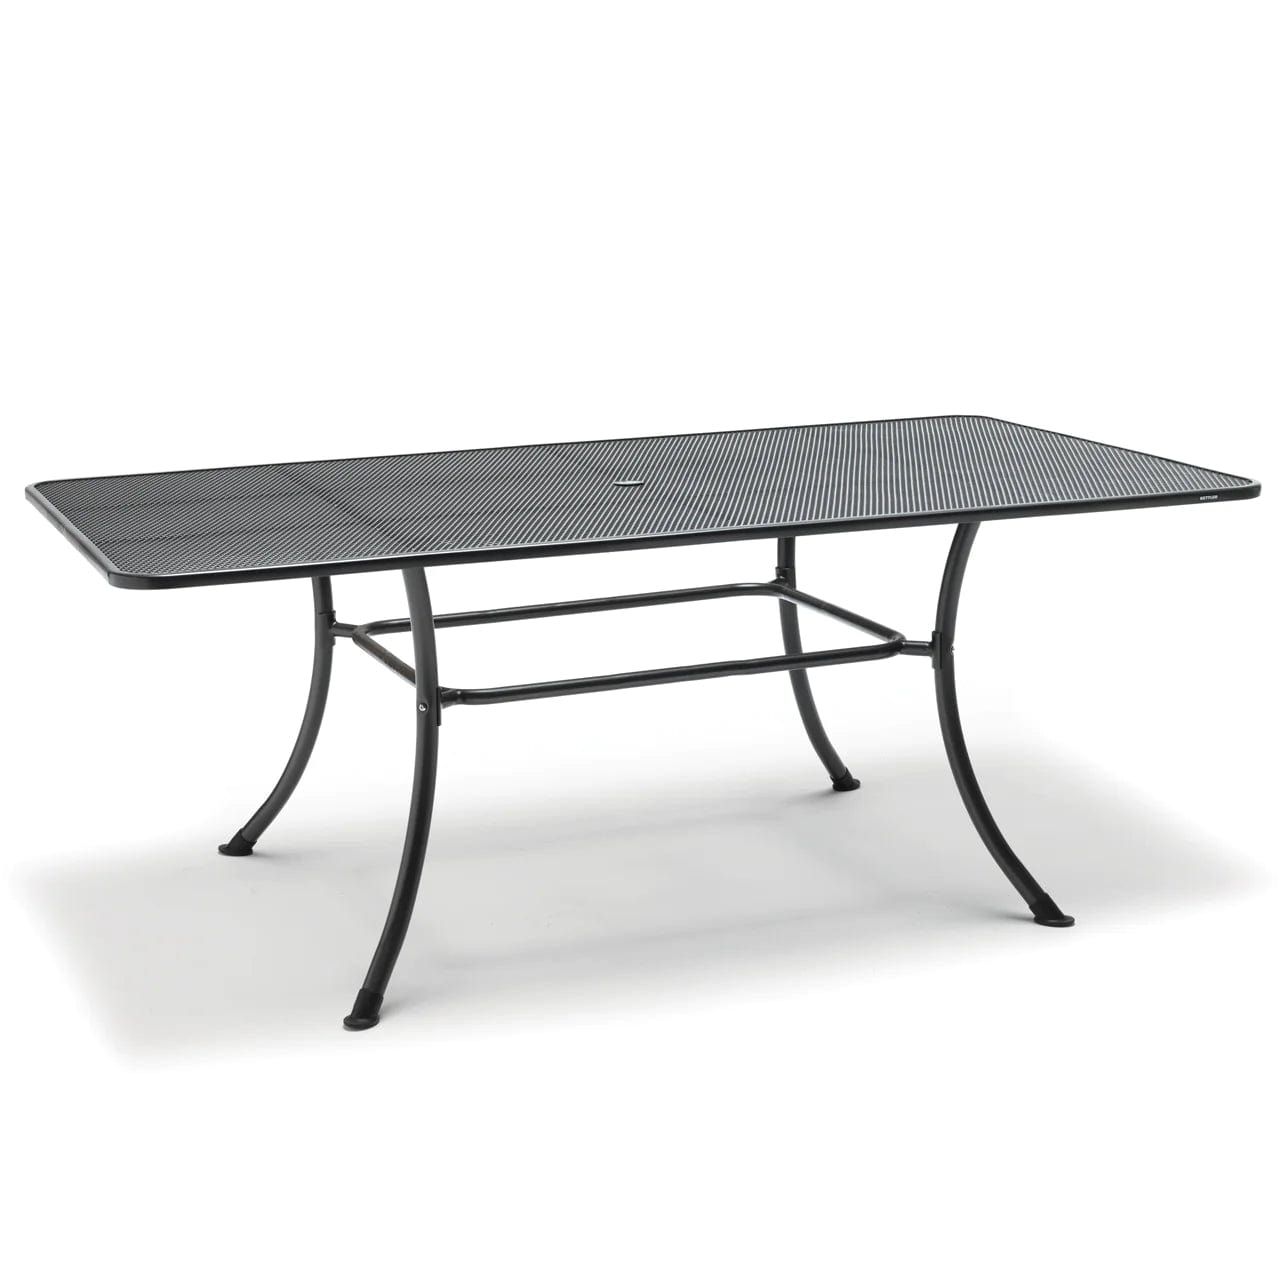 57"x35" outdoor wrought iron mesh table